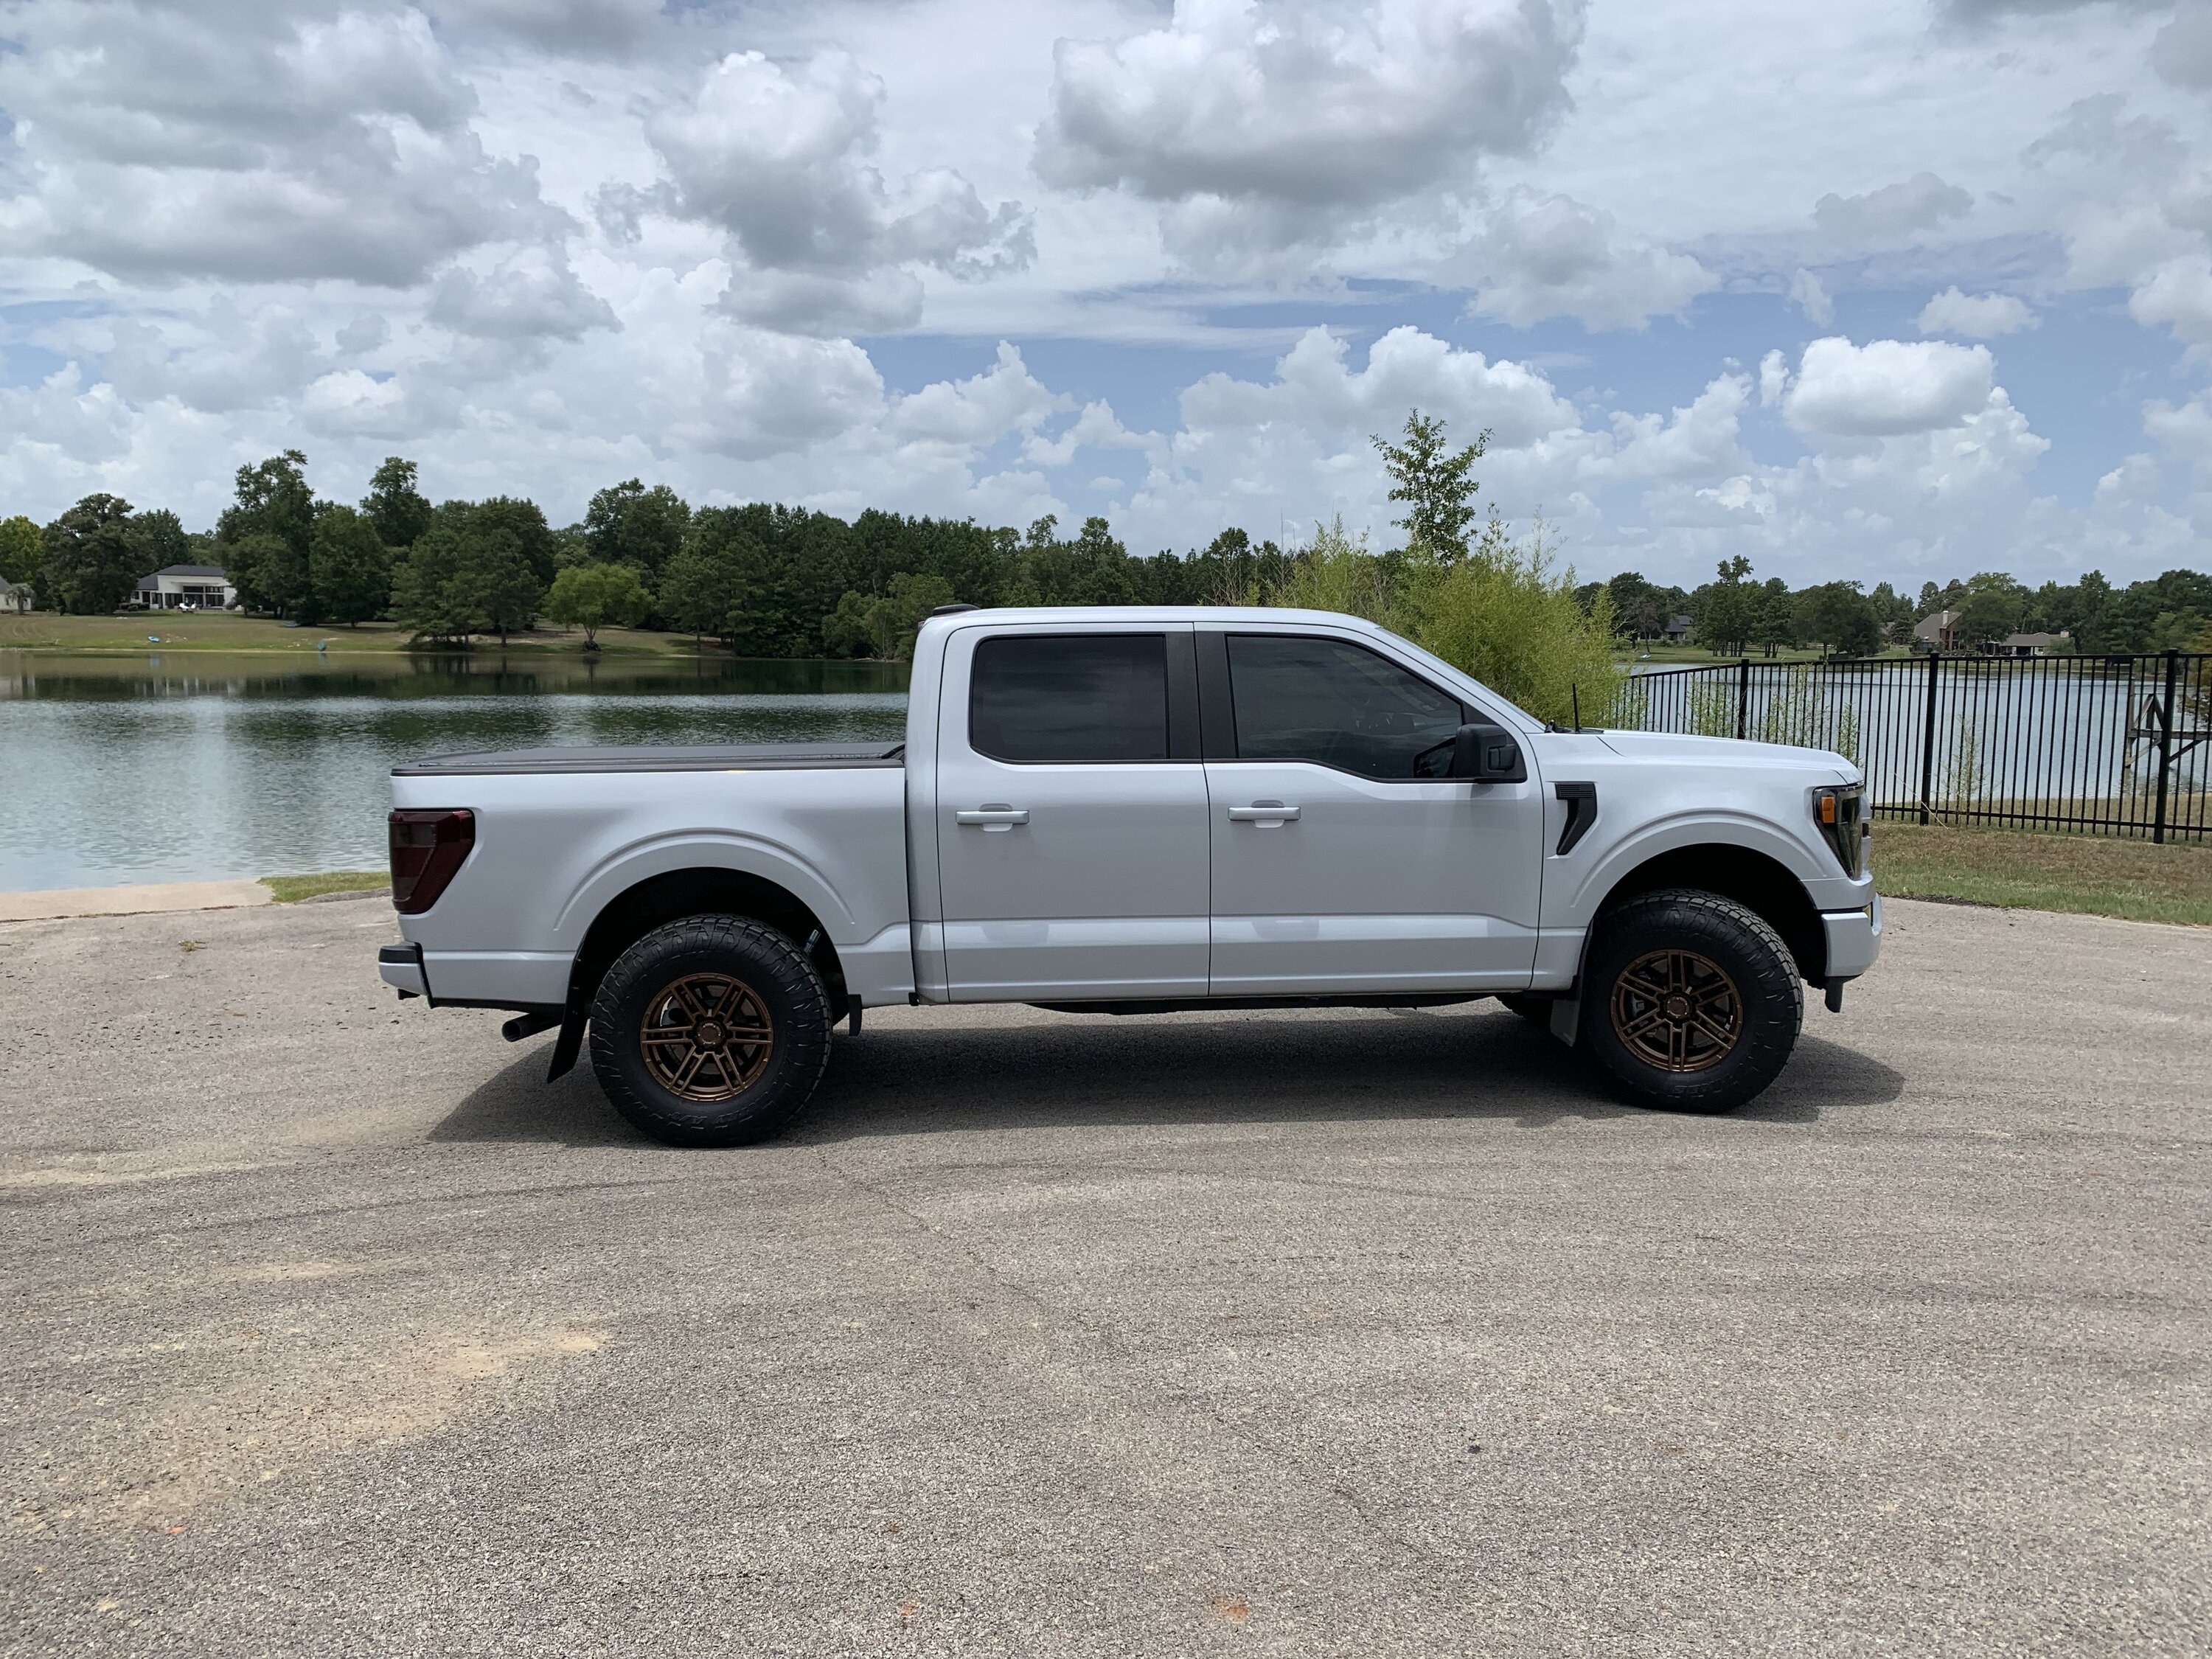 Ford F-150 Post a Pic of Your F150 and We’ll Rate It 1670984224599